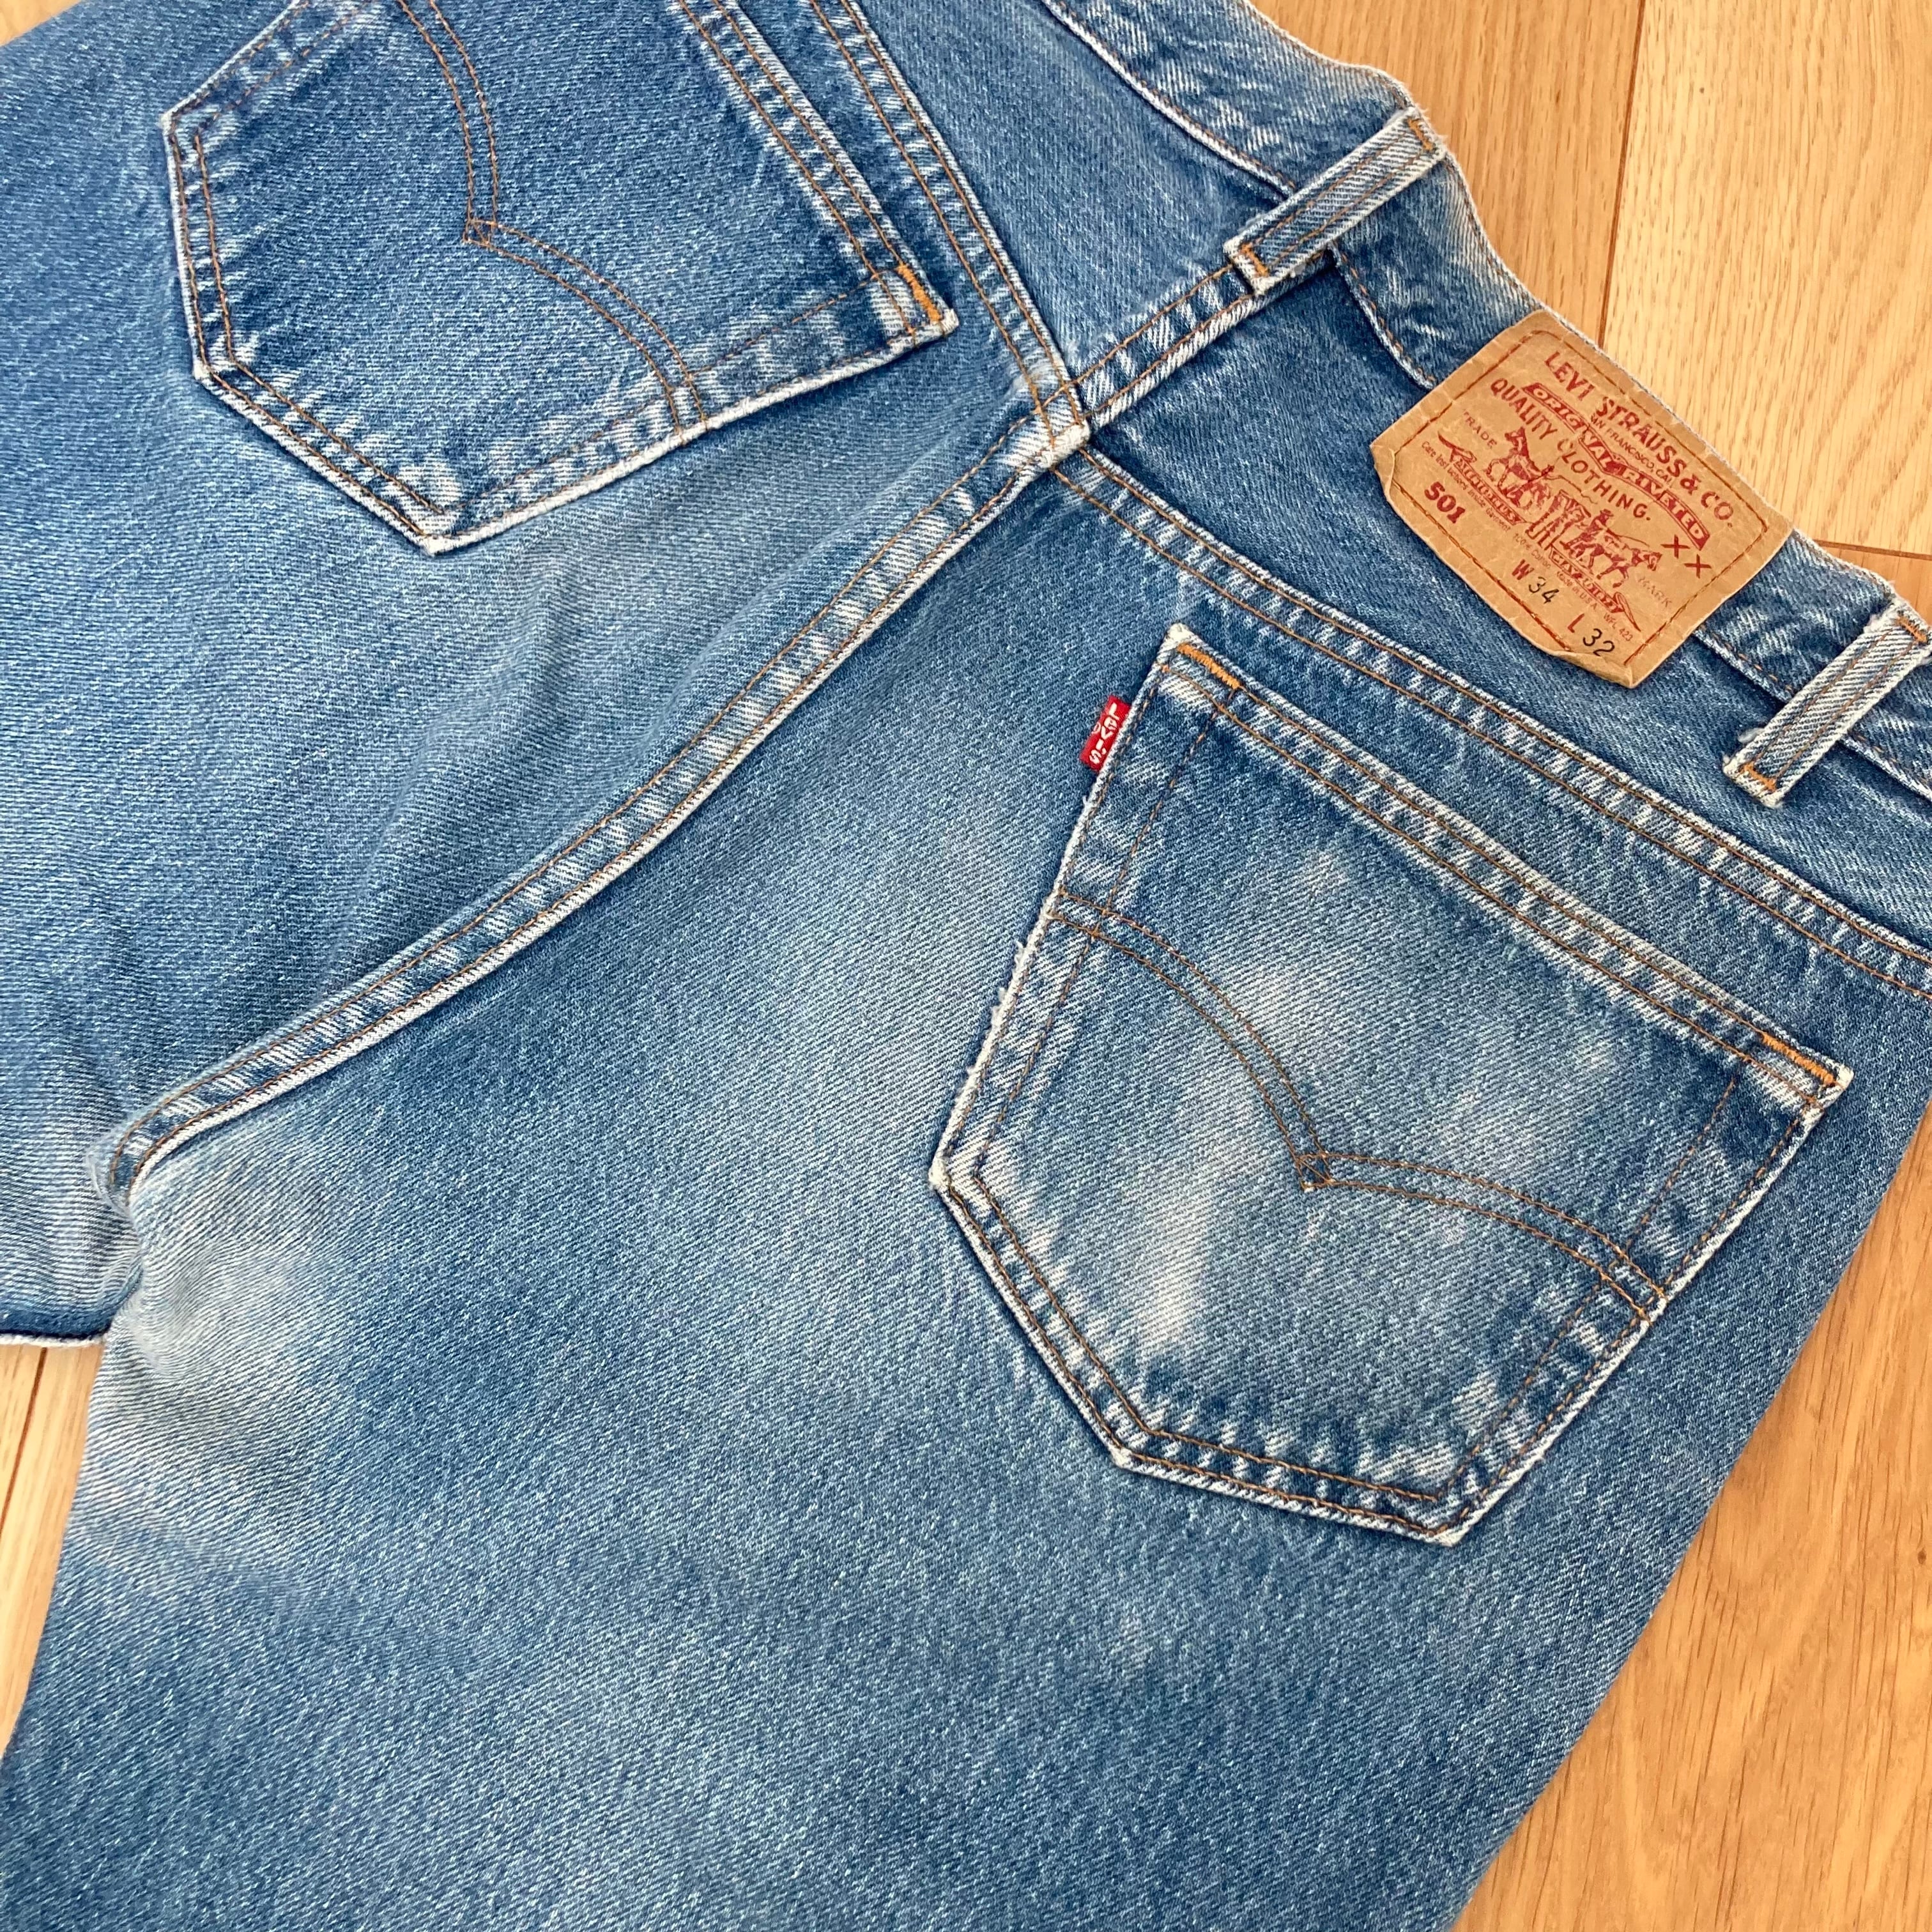 90's Levi's 501 W34 inch “MADE IN USA” | The ROUNDABOUT Store